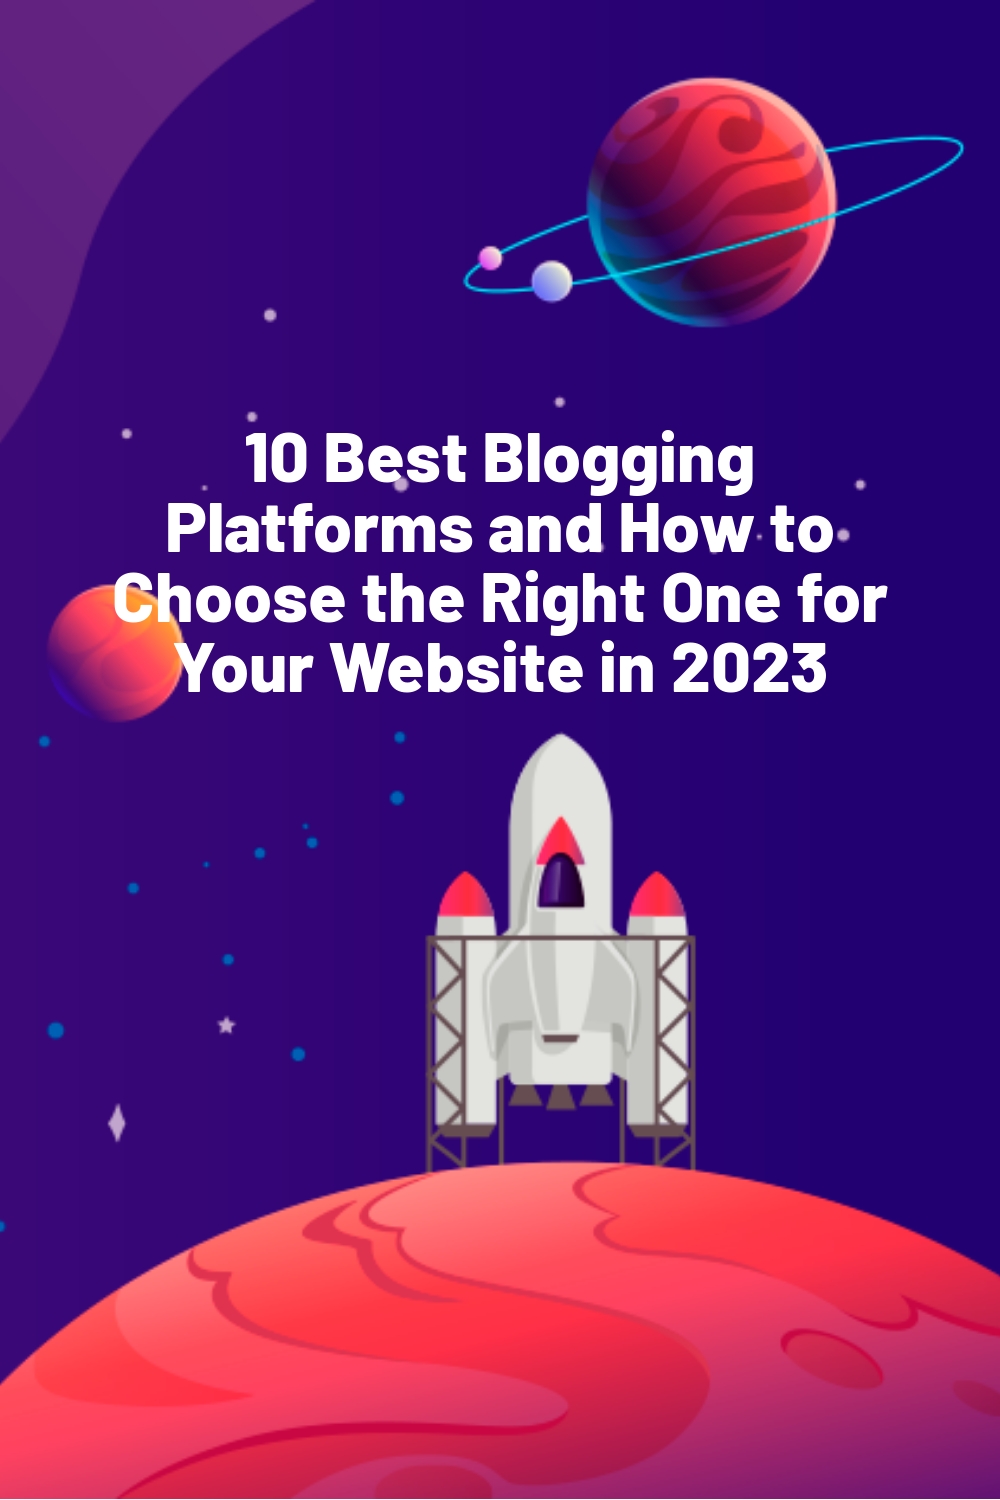 10 Best Blogging Platforms and How to Choose the Right One for Your Website in 2023